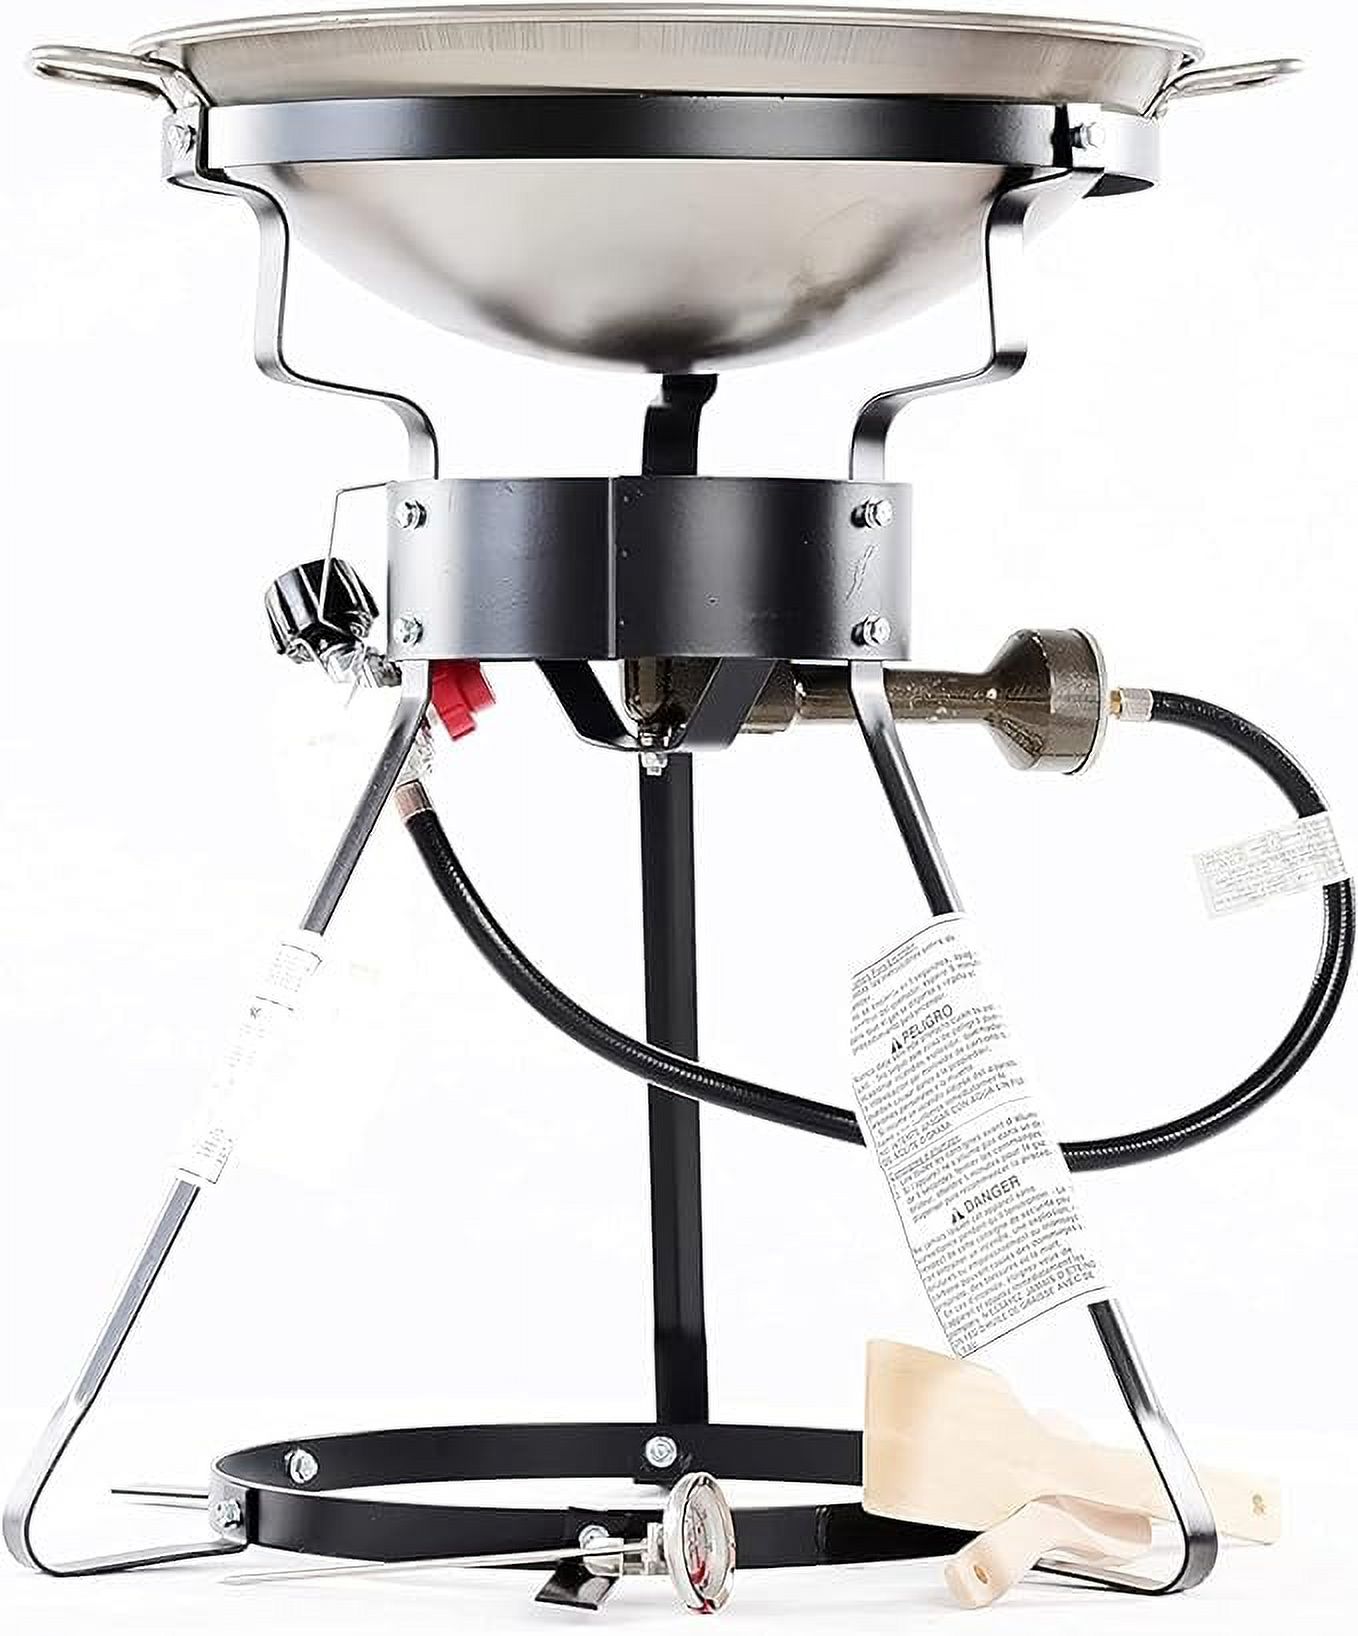 Pre-Owned King Kooker 24WC 12" Portable Propane Outdoor Cooker with Wok 24WC - Black (Fair) - image 5 of 5